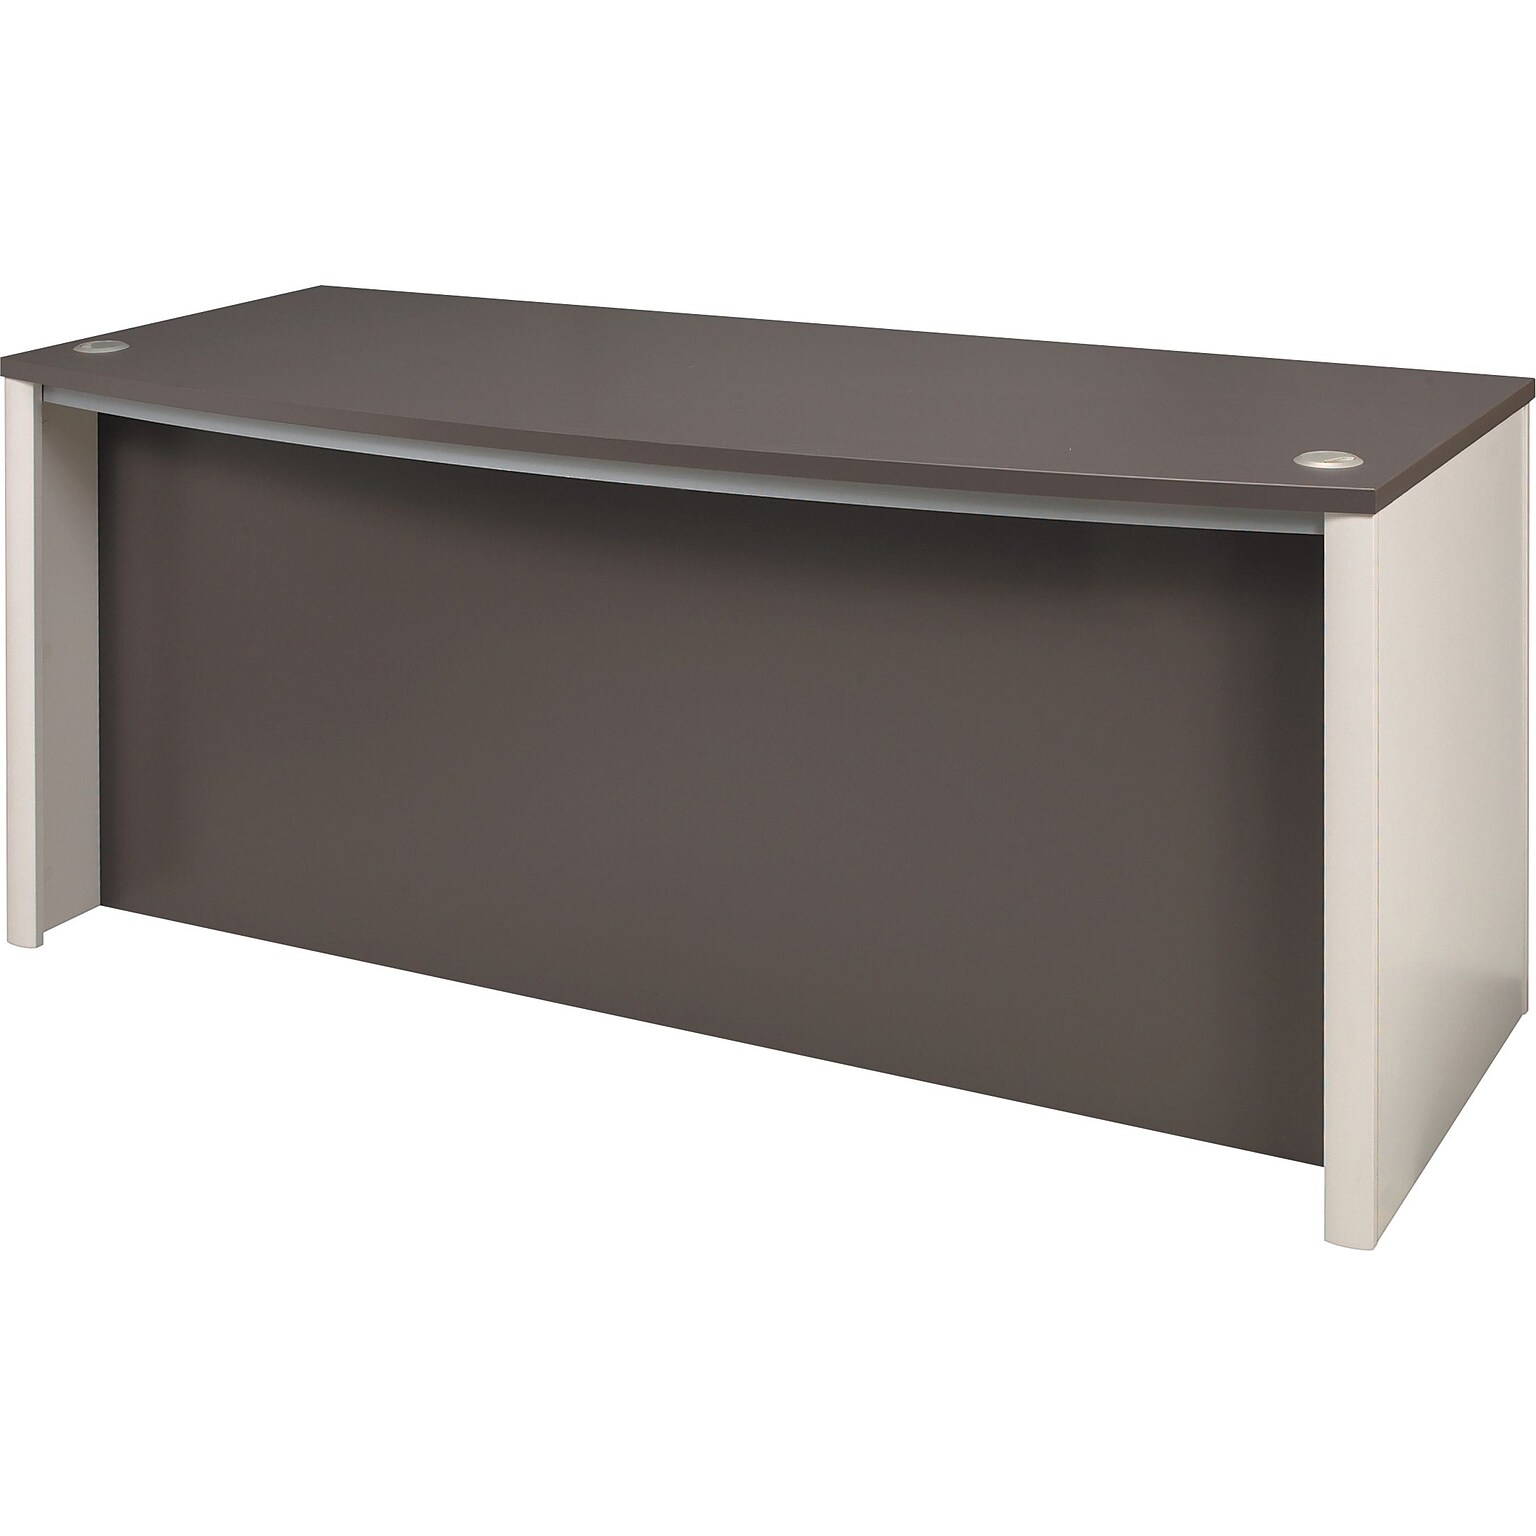 Bestar® Connexion Collection in Sandstone and Slate, Executive Desk